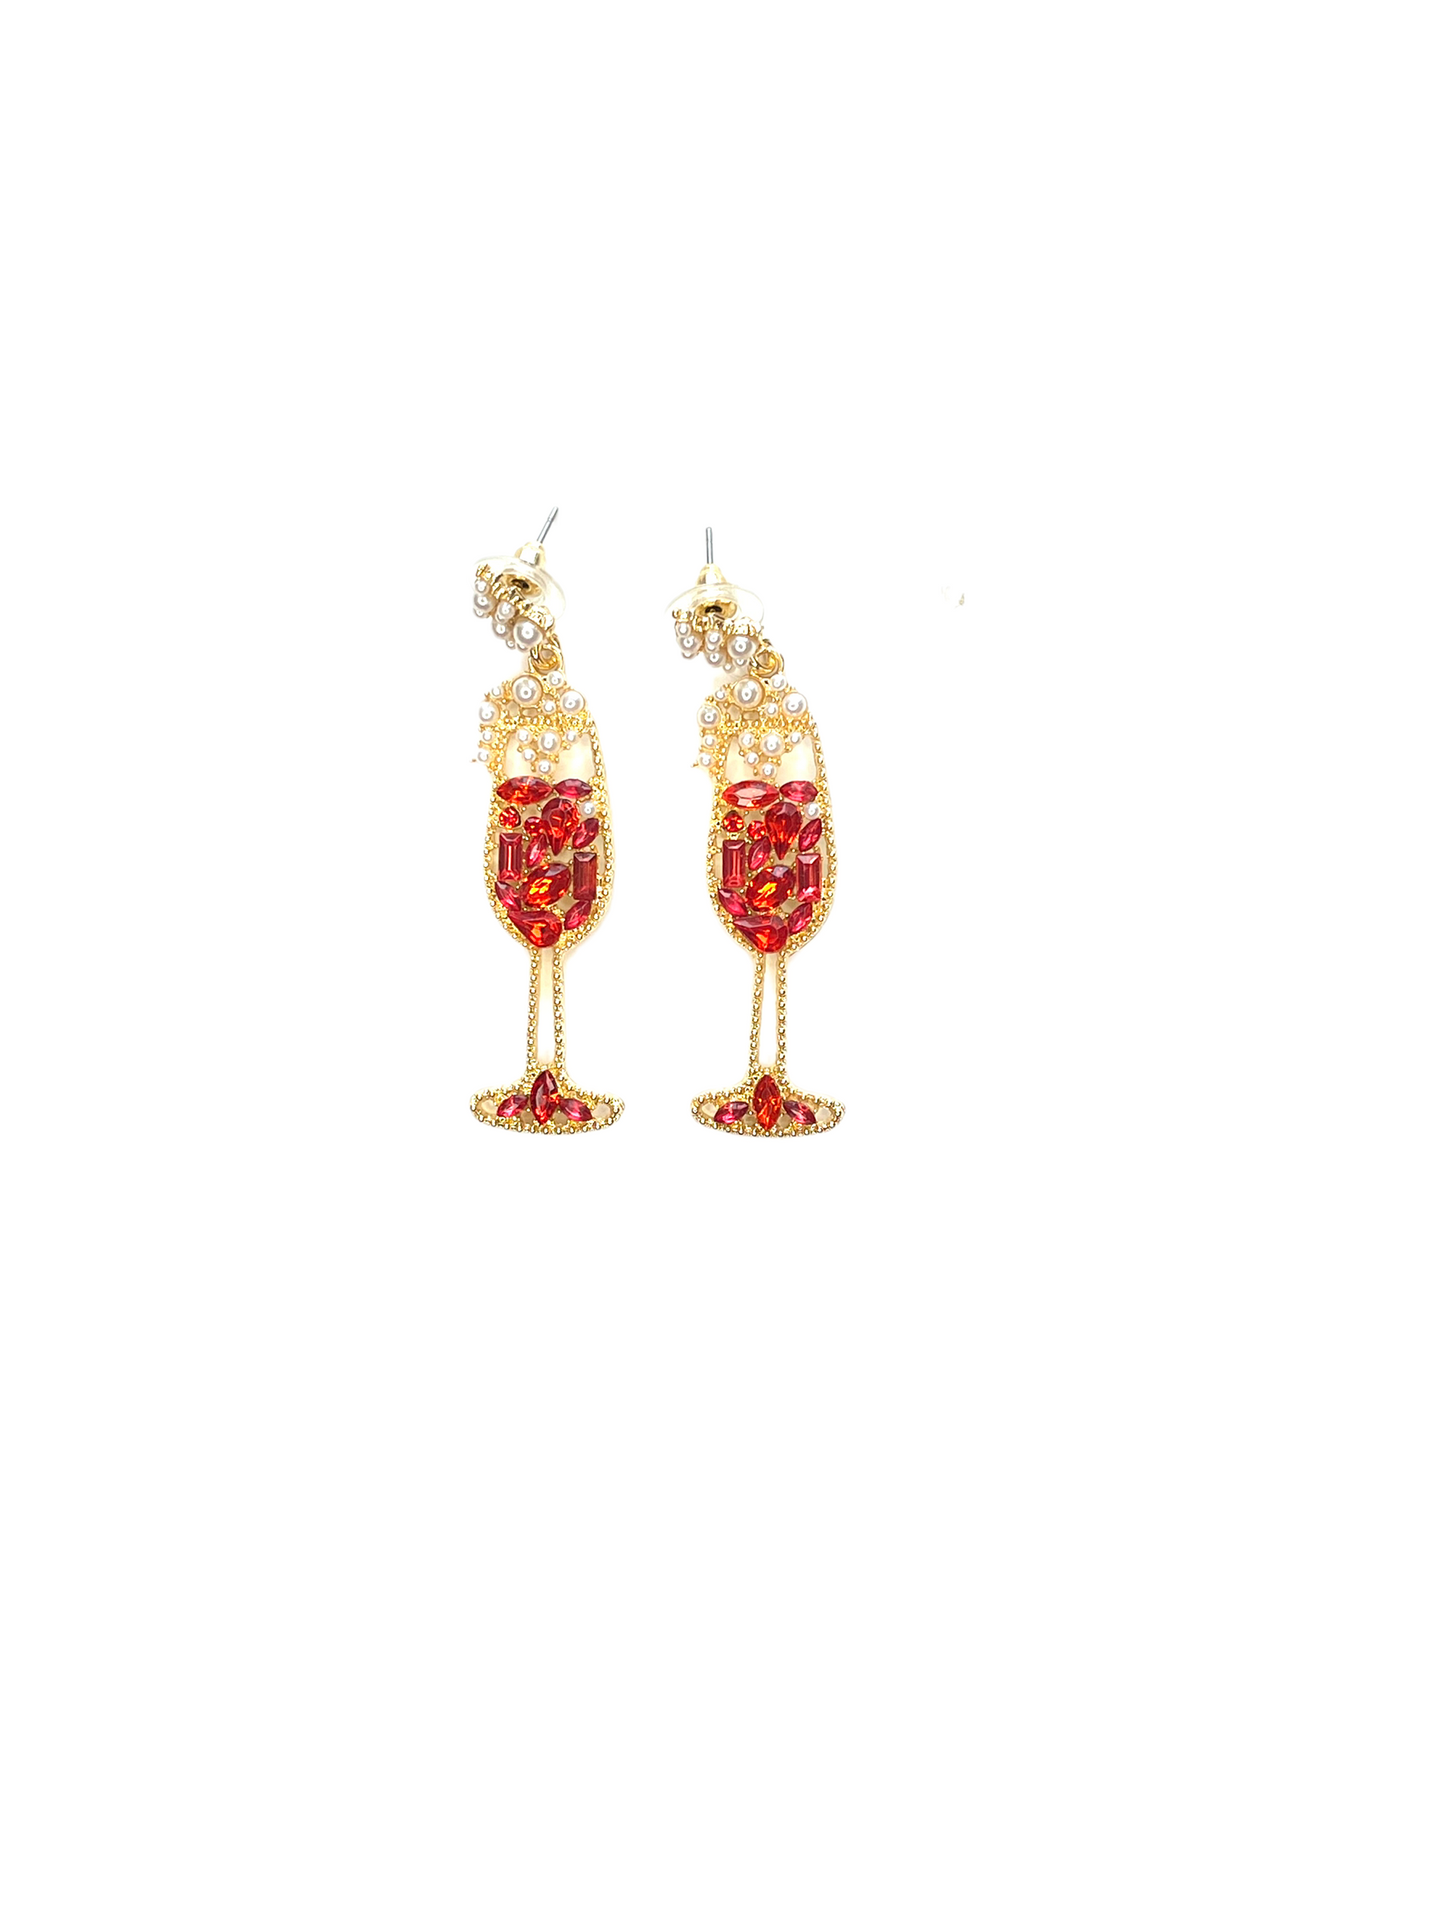 Red Champagne Glass Earrings